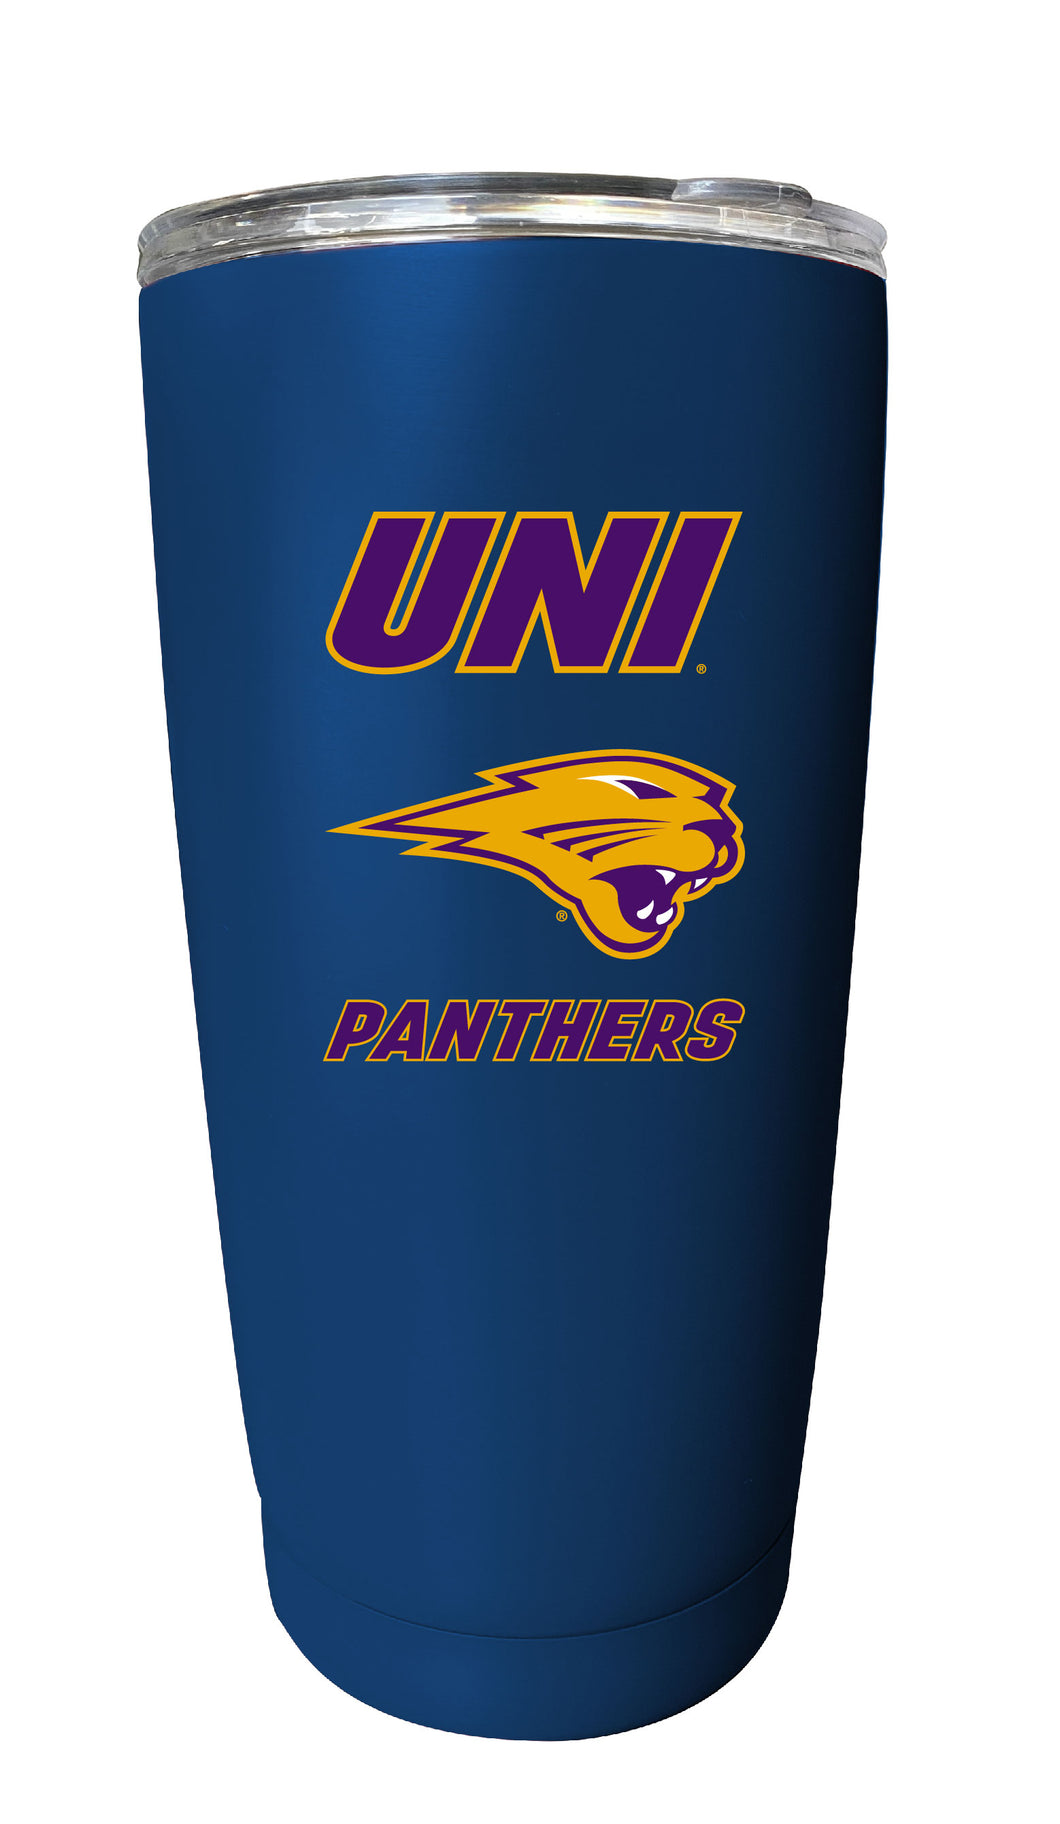 Northern Iowa Panthers NCAA Insulated Tumbler - 16oz Stainless Steel Travel Mug Choose Your Color